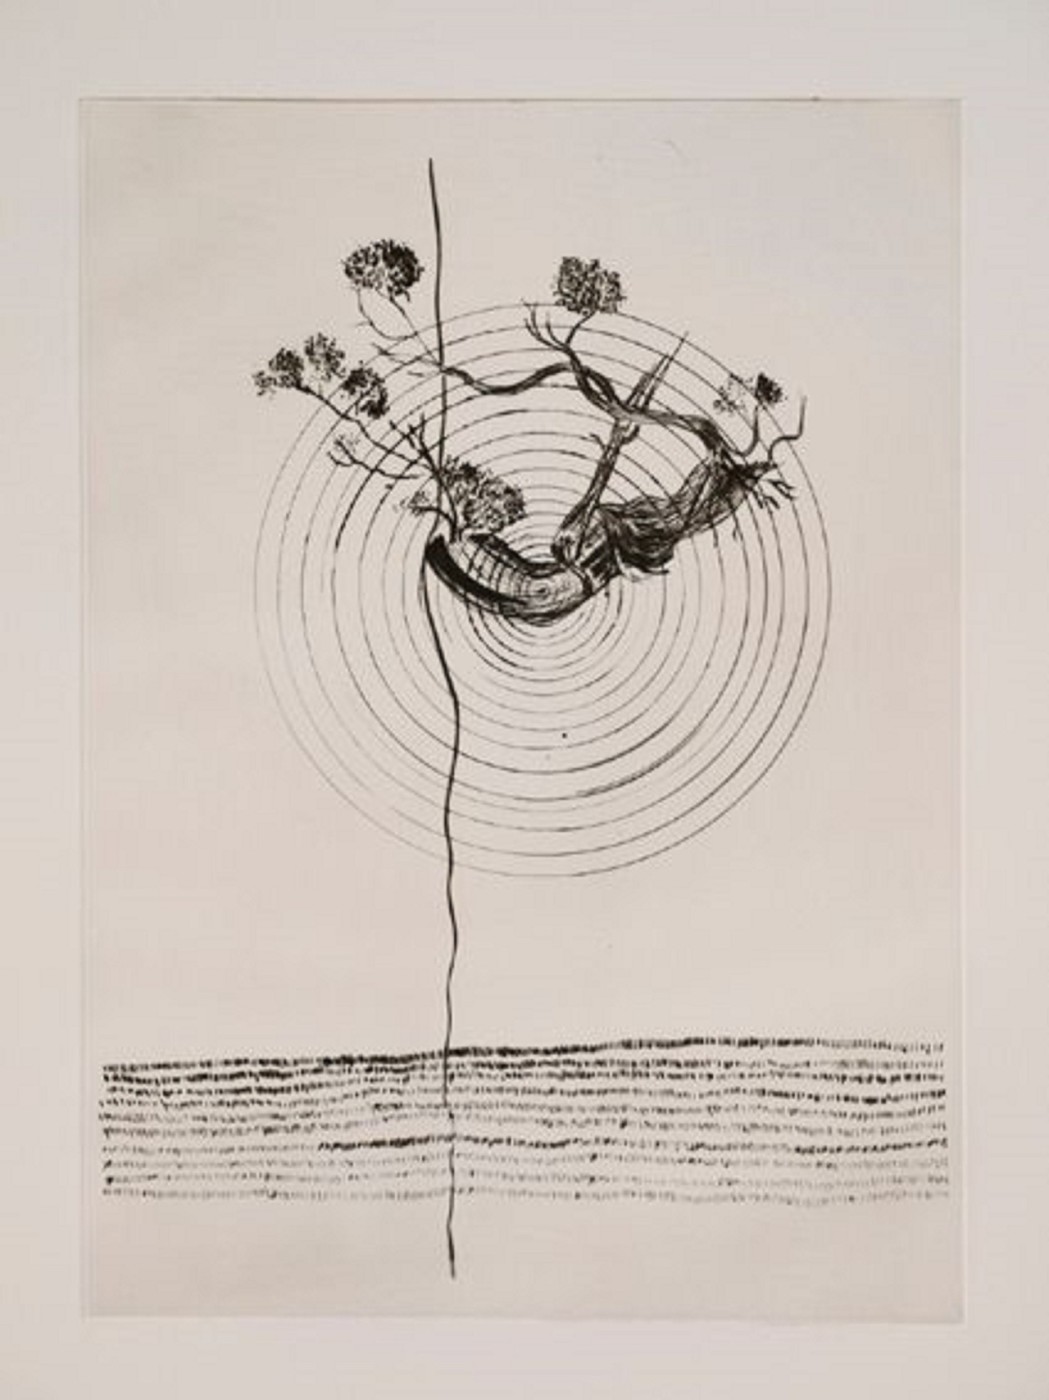 giuseppe-penone-musical-transcription-of-the-structure-of-trees-2012